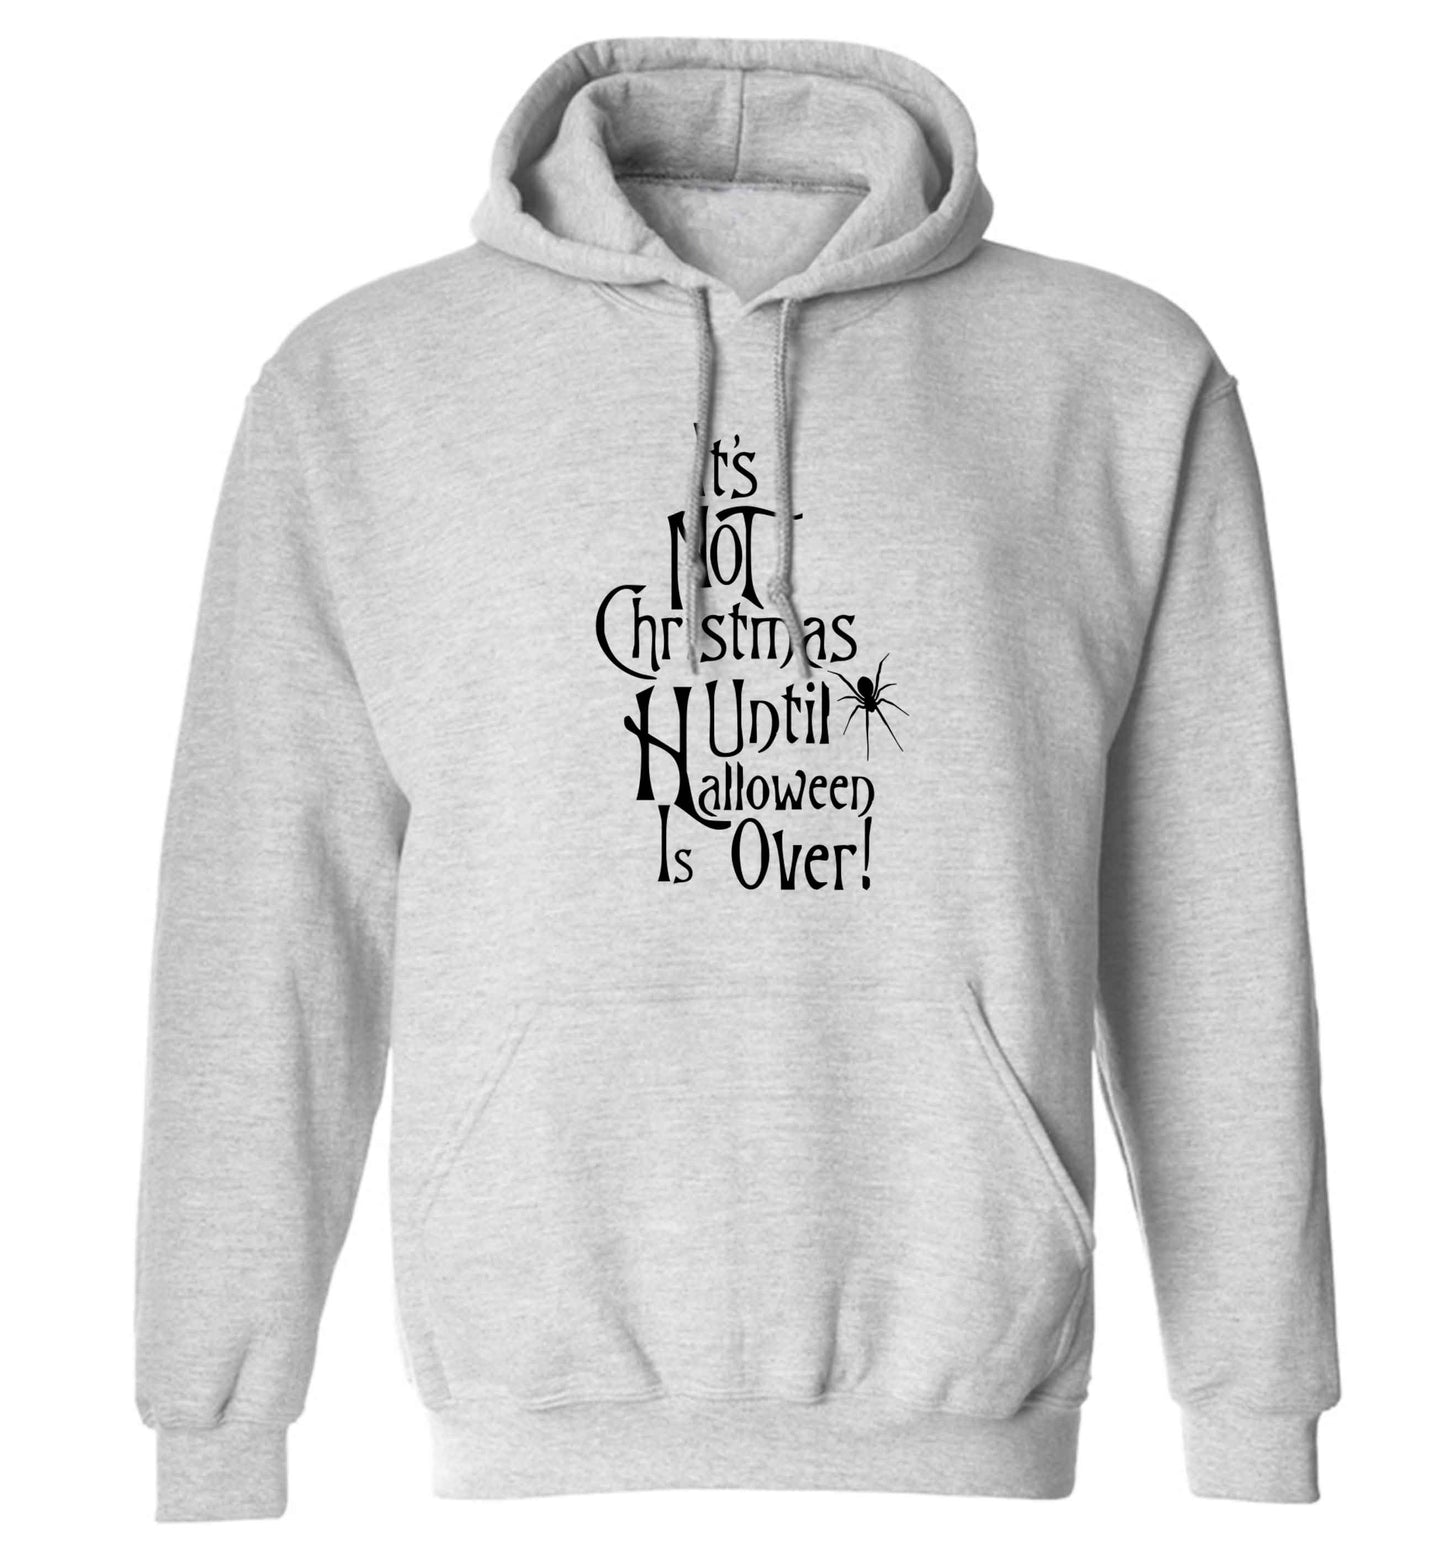 It's not Christmas until Halloween is over adults unisex grey hoodie 2XL